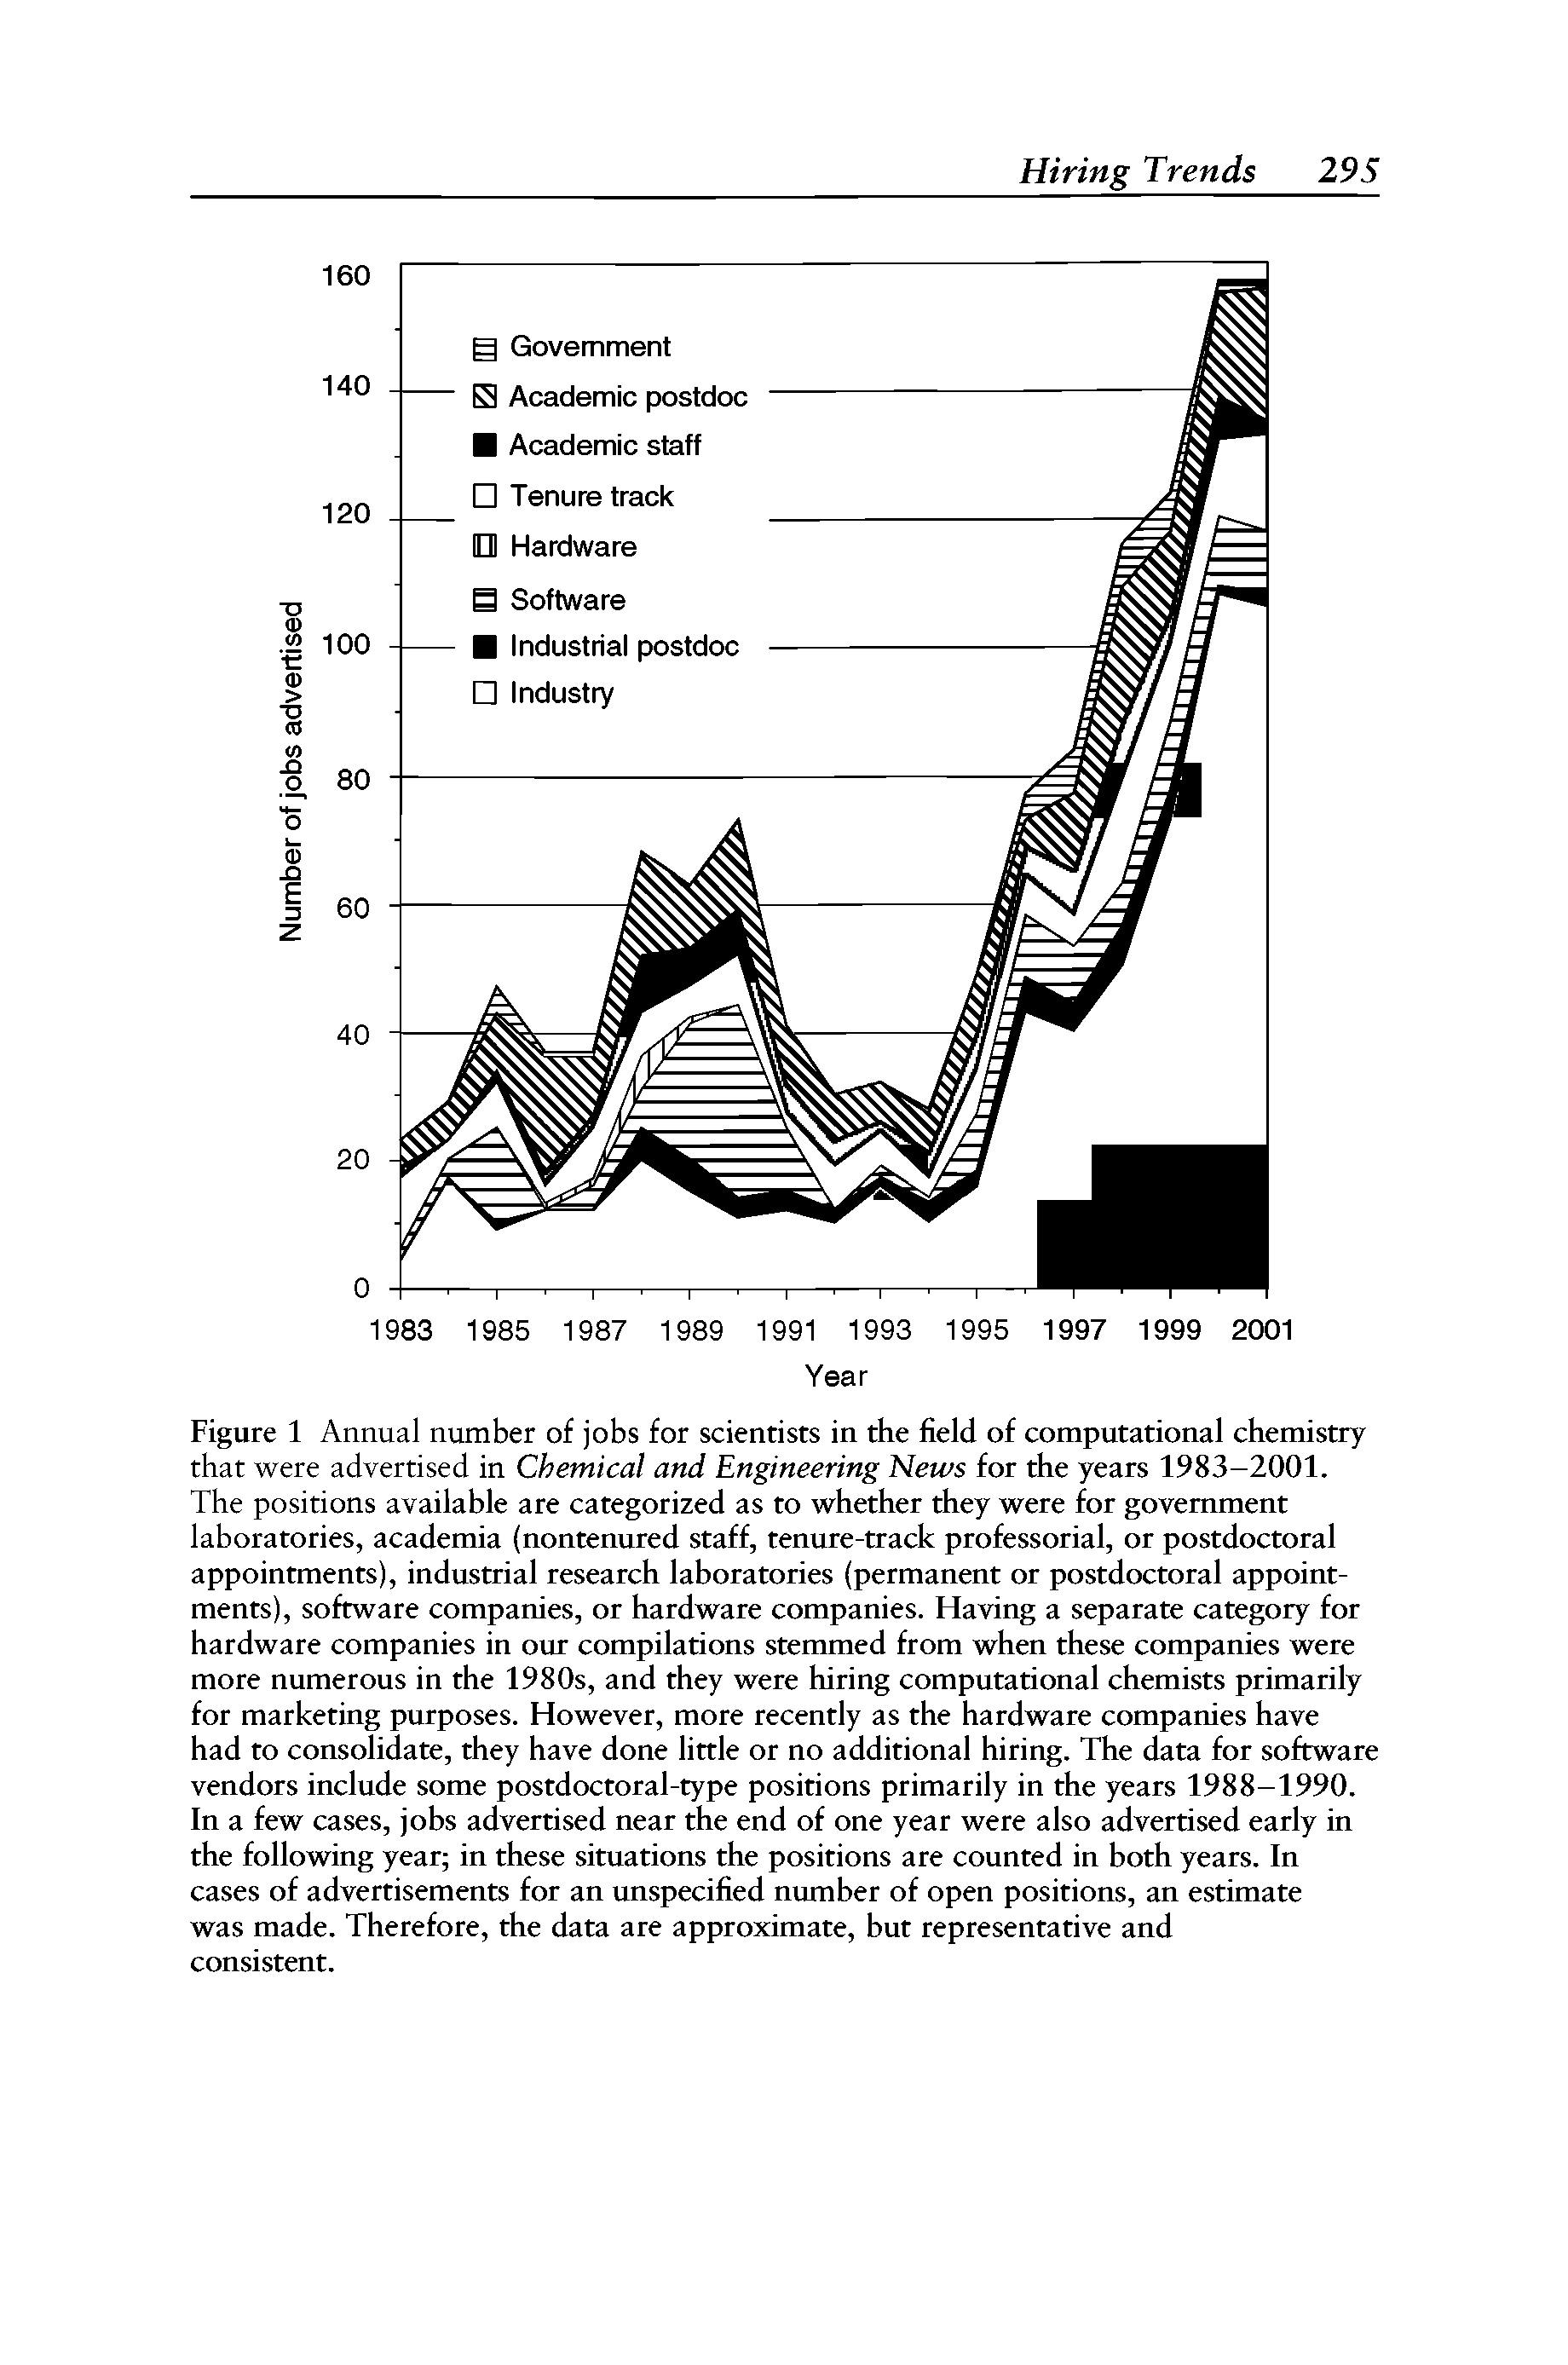 Figure 1 Annual number of jobs for scientists in the field of computational chemistry that were advertised in Chemical and Engineering News for the years 1983-2001. The positions available are categorized as to whether they were for government laboratories, academia (nontenured staff, tenure-track professorial, or postdoctoral appointments), industrial research lahoratories (permanent or postdoctoral appointments), software companies, or hardware companies. Having a separate category for hardware companies in our compilations stemmed from when these companies were more numerous in the 1980s, and they were hiring computational chemists primarily for marketing purposes. However, more recently as the hardware companies have had to consolidate, they have done little or no additional hiring. The data for software vendors include some postdoctoral-type positions primarily in the years 1988-1990. In a few cases, jobs advertised near the end of one year were also advertised early in the following year in these situations the positions are counted in both years. In cases of advertisements for an unspecified number of open positions, an estimate was made. Therefore, the data are approximate, but representative and consistent.